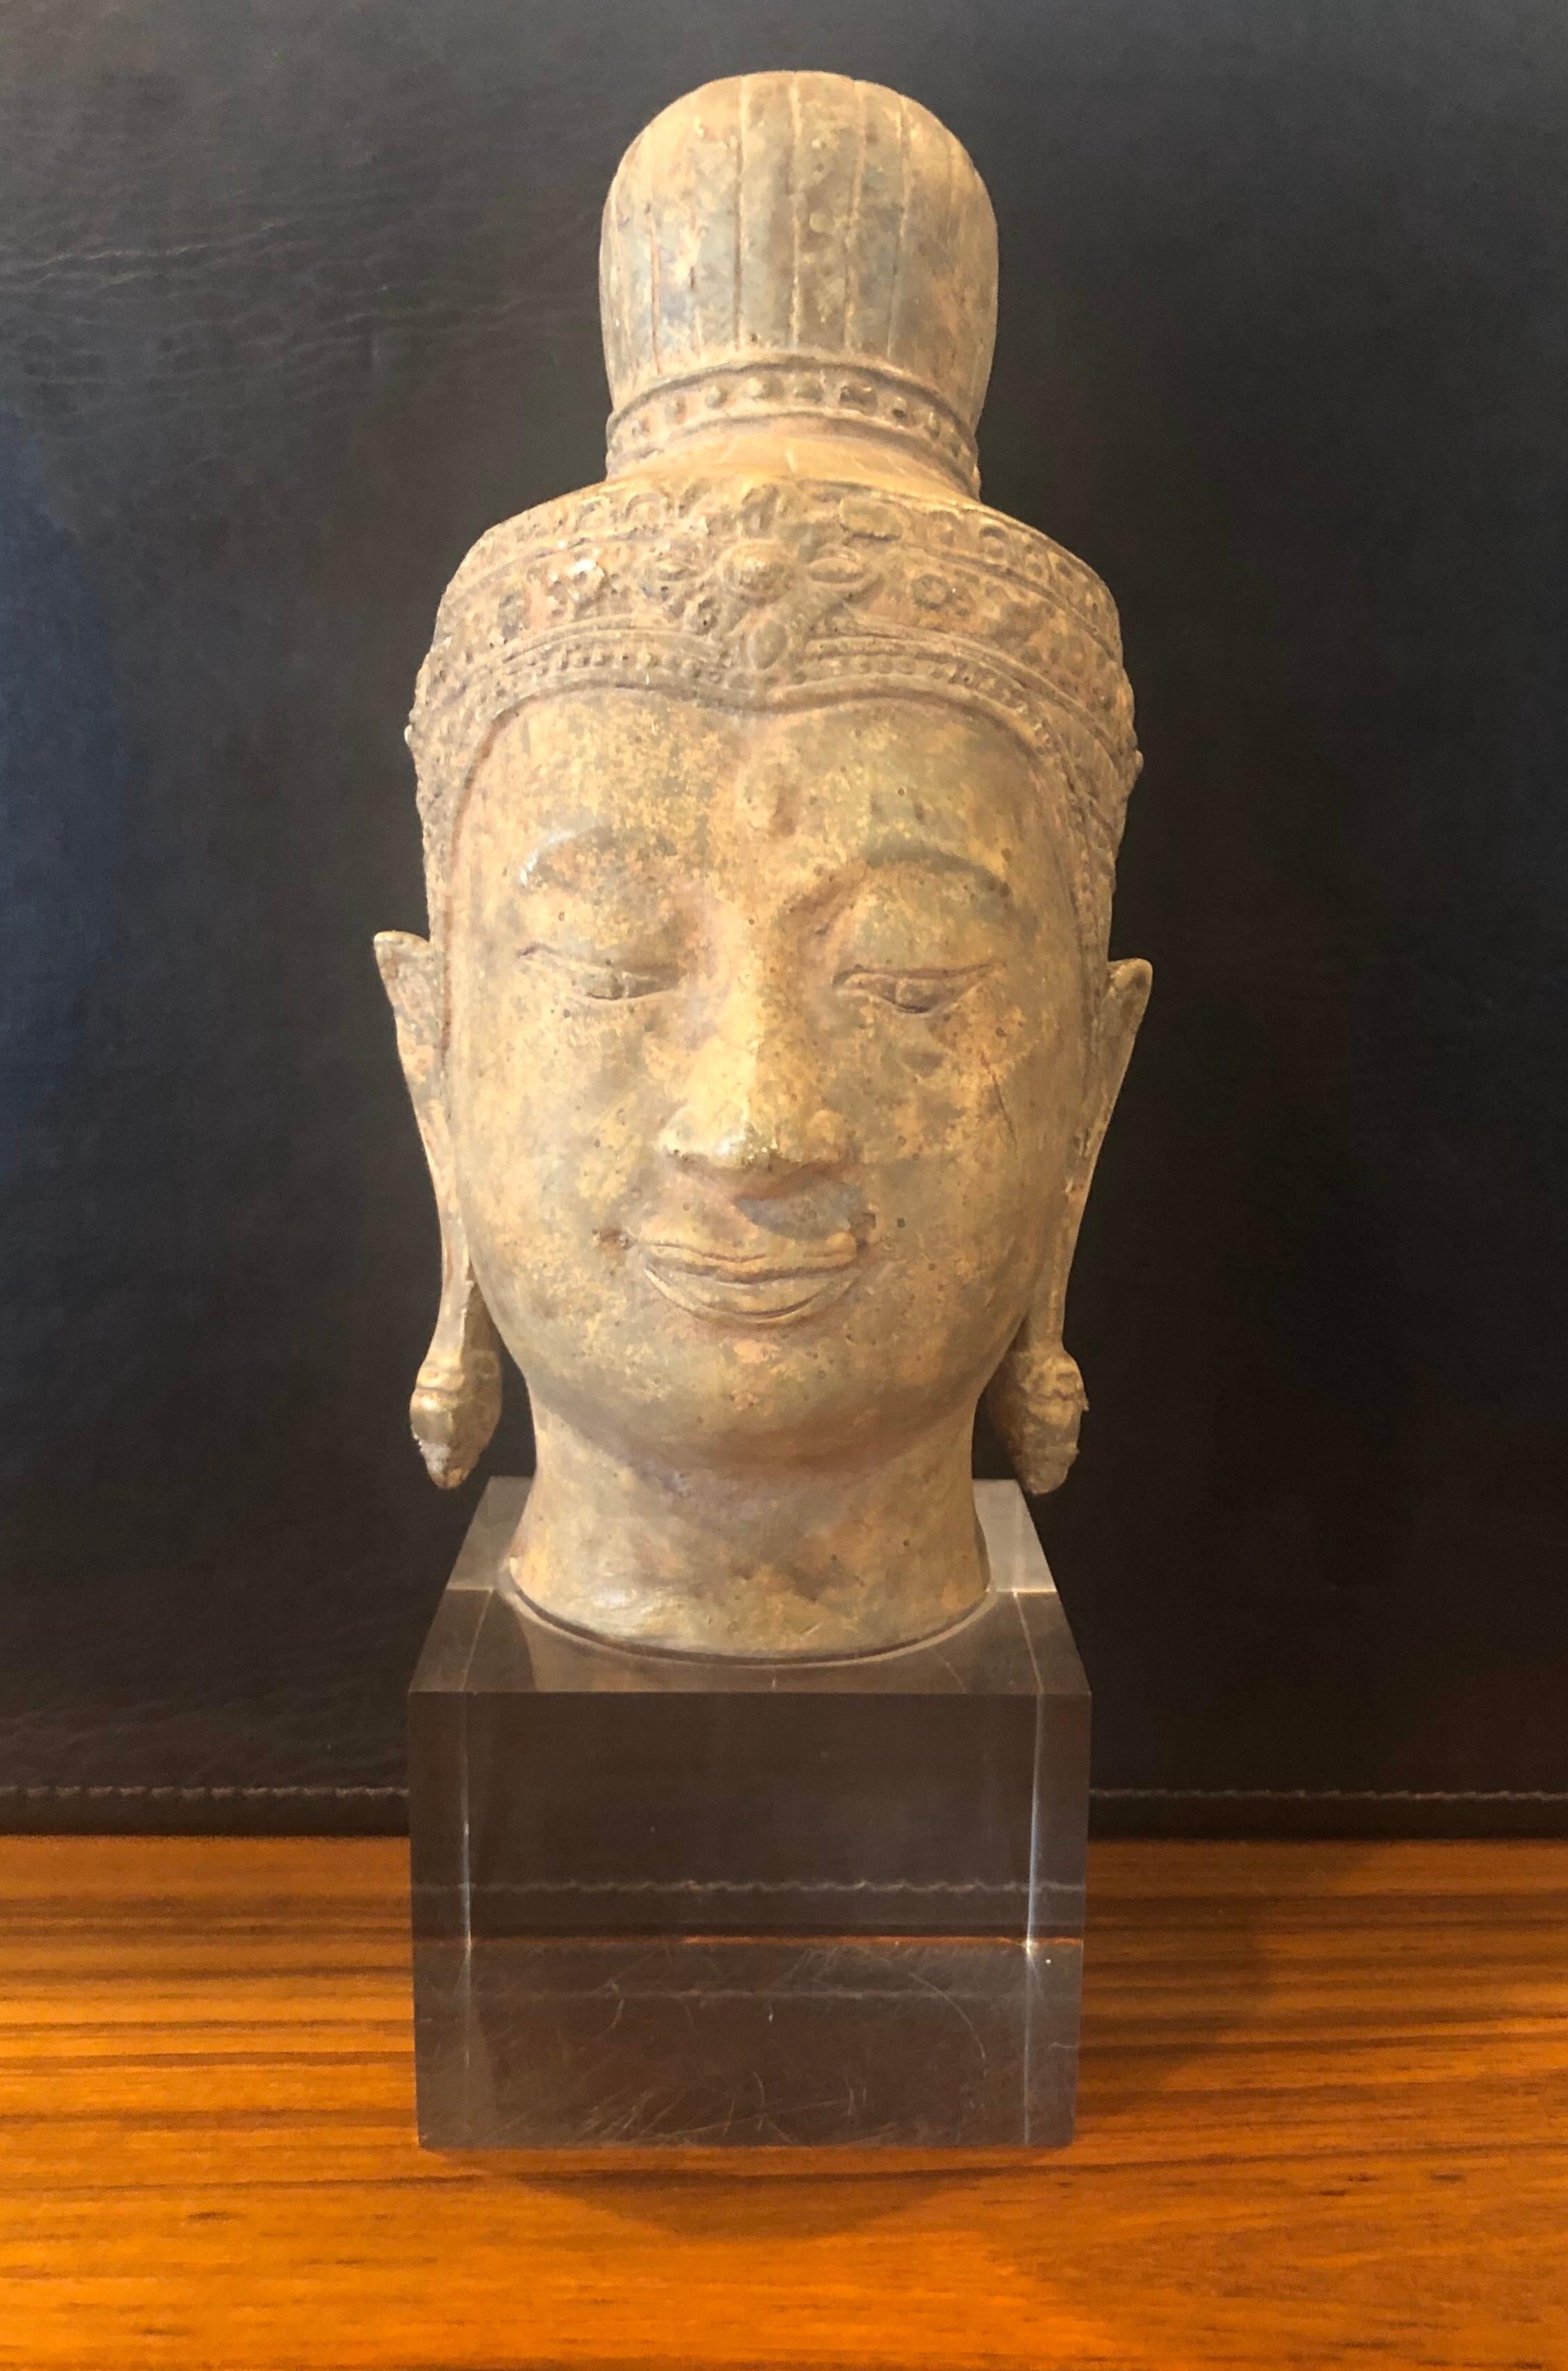 A very cool ceramic Buddha head or bust on a Lucite base, circa 1970s. The piece is in very good vintage condition with no chips or cracks. The piece measures 5.5